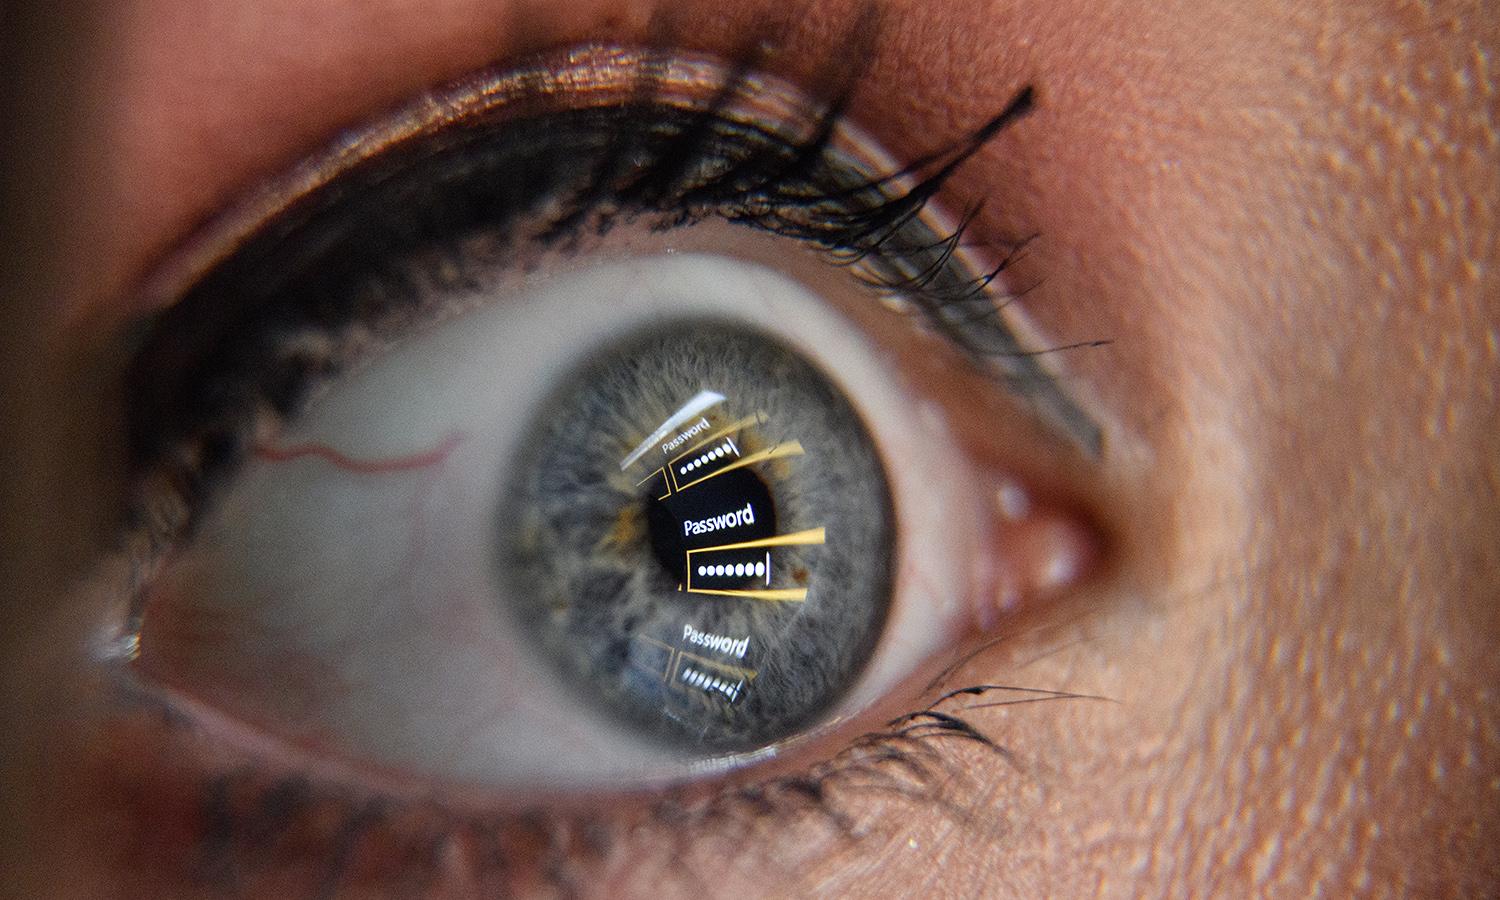 An image of a password login dialog box is reflected on the eye of a young woman on Aug. 9, 2017, in London. (Photo by Leon Neal/Getty Images)